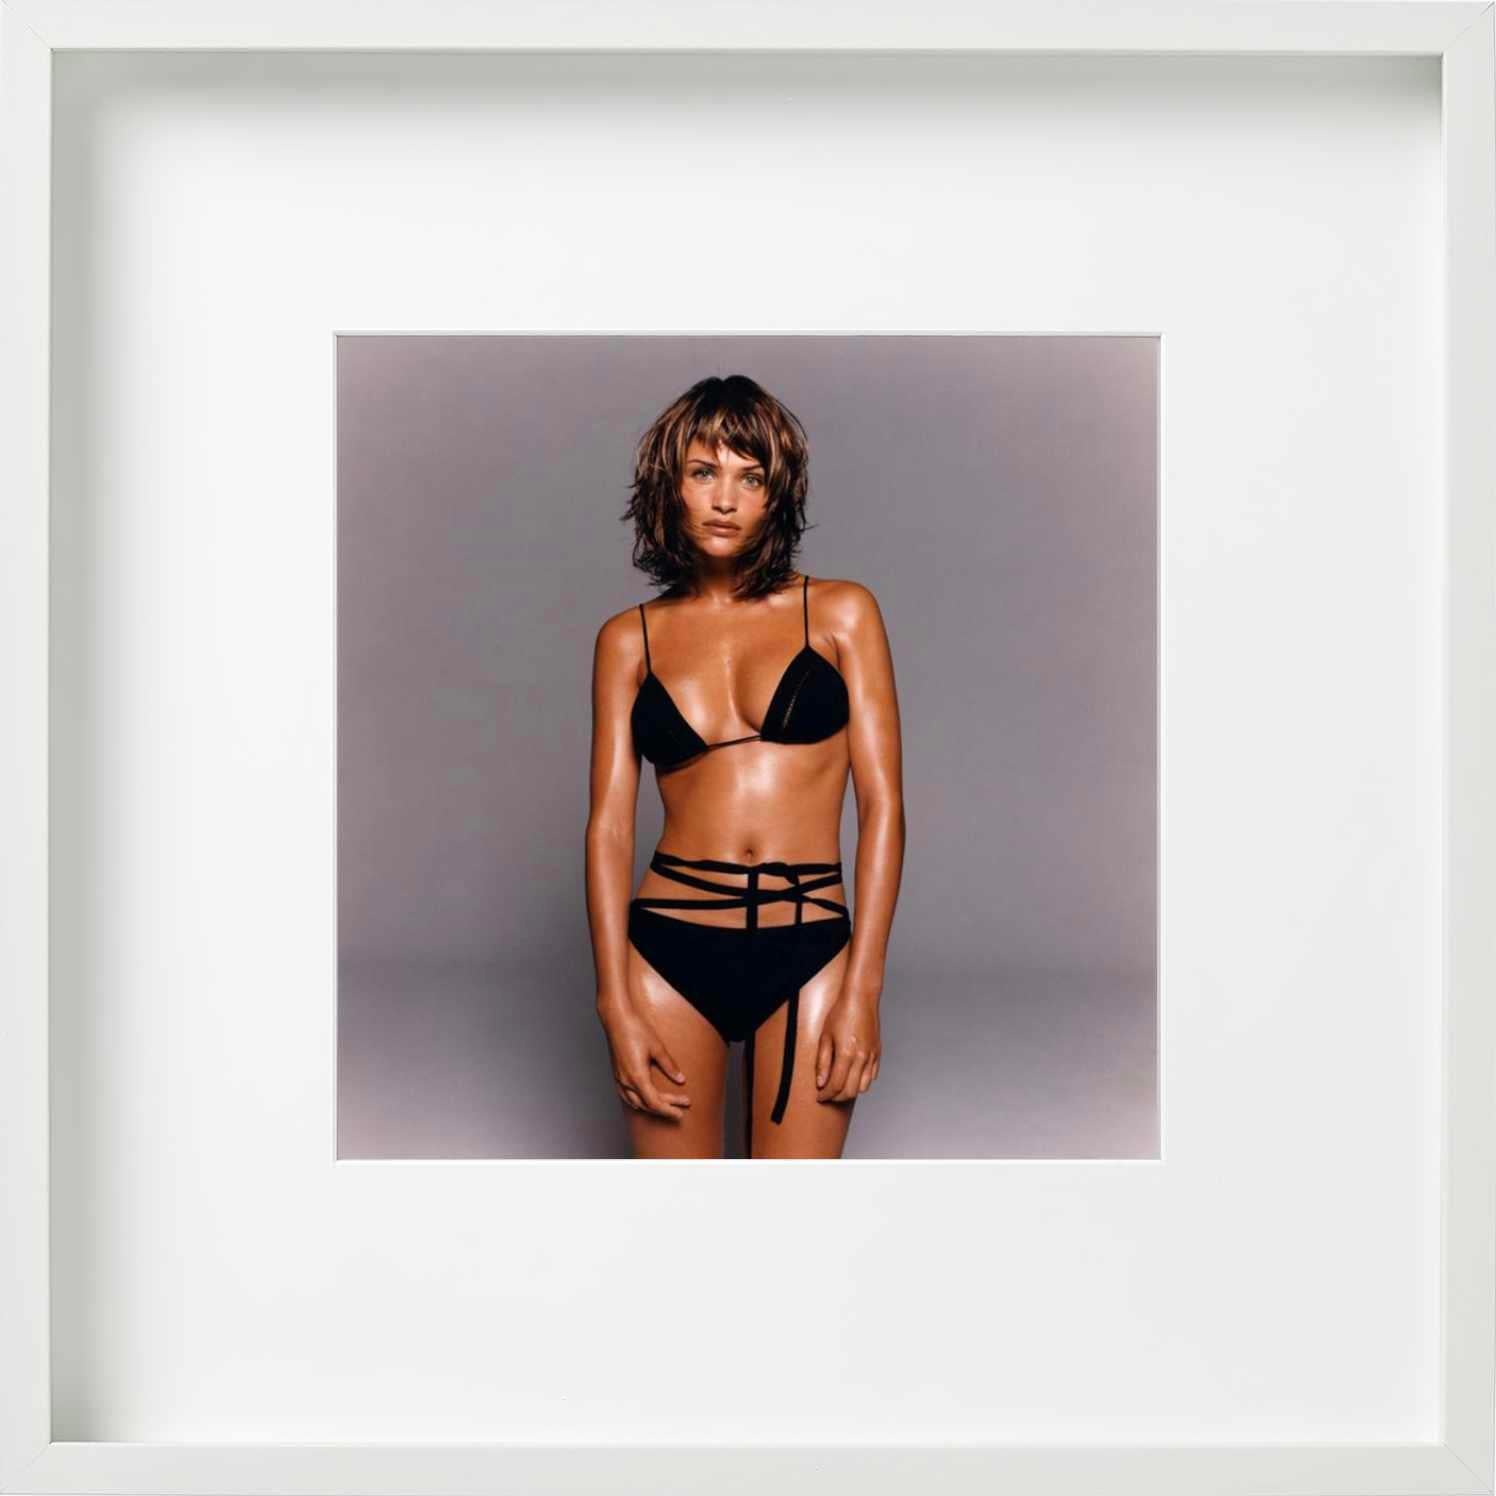 All prints are limited edition. Available in multiple sizes. High-end framing on request.

All prints are done and signed by the artist. The collector receives an additional certificate of authenticity from the gallery.

Helena Christensen is one of